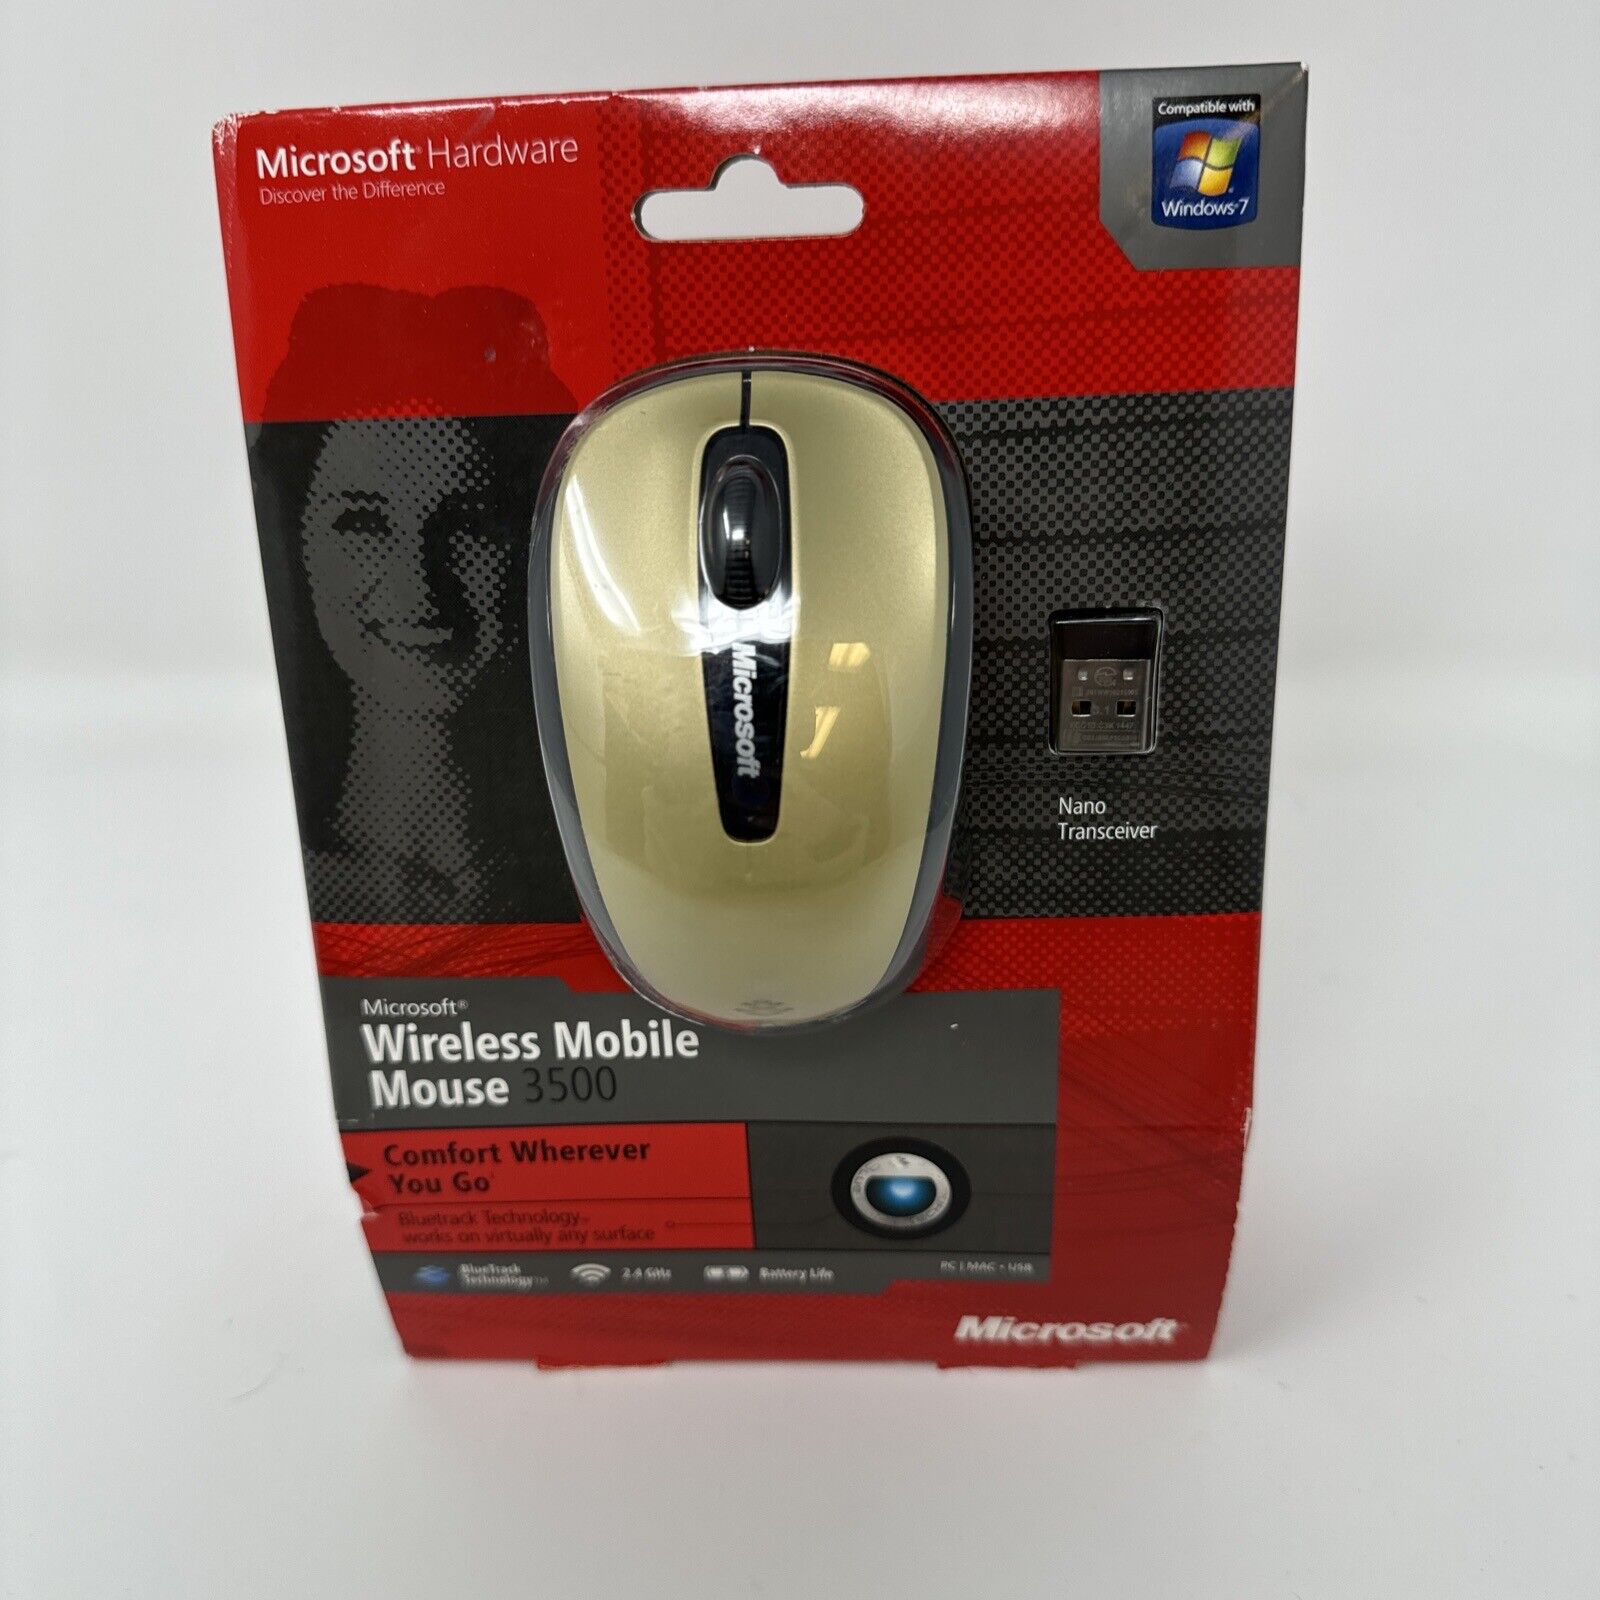 Microsoft Wireless Mobile Mouse 3500 w/ Receiver Bright Gold Model 1427 - SEALED